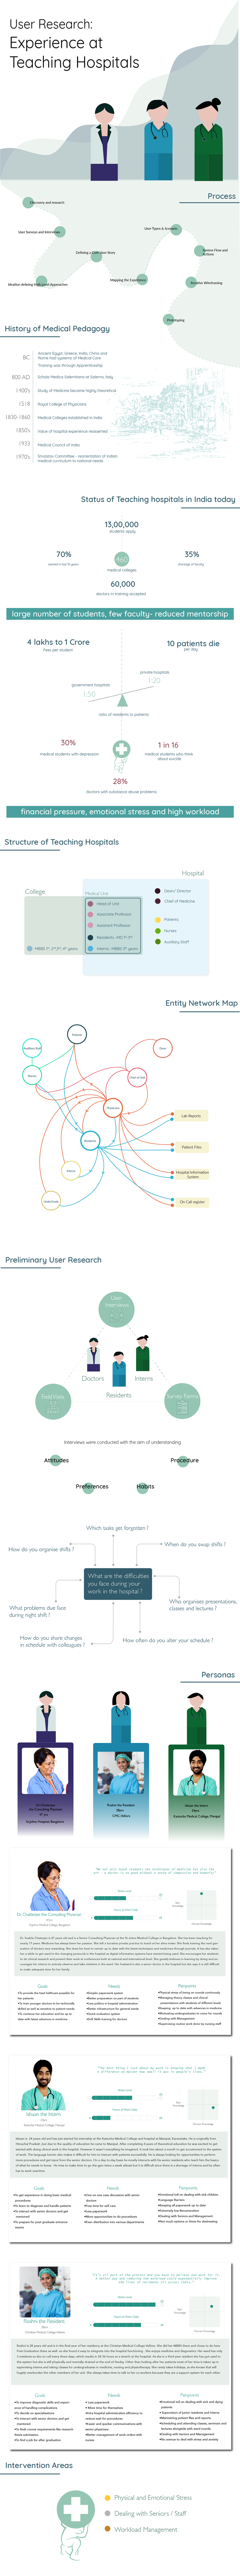 UI ux research healthcare information design information architecture  Service design User research